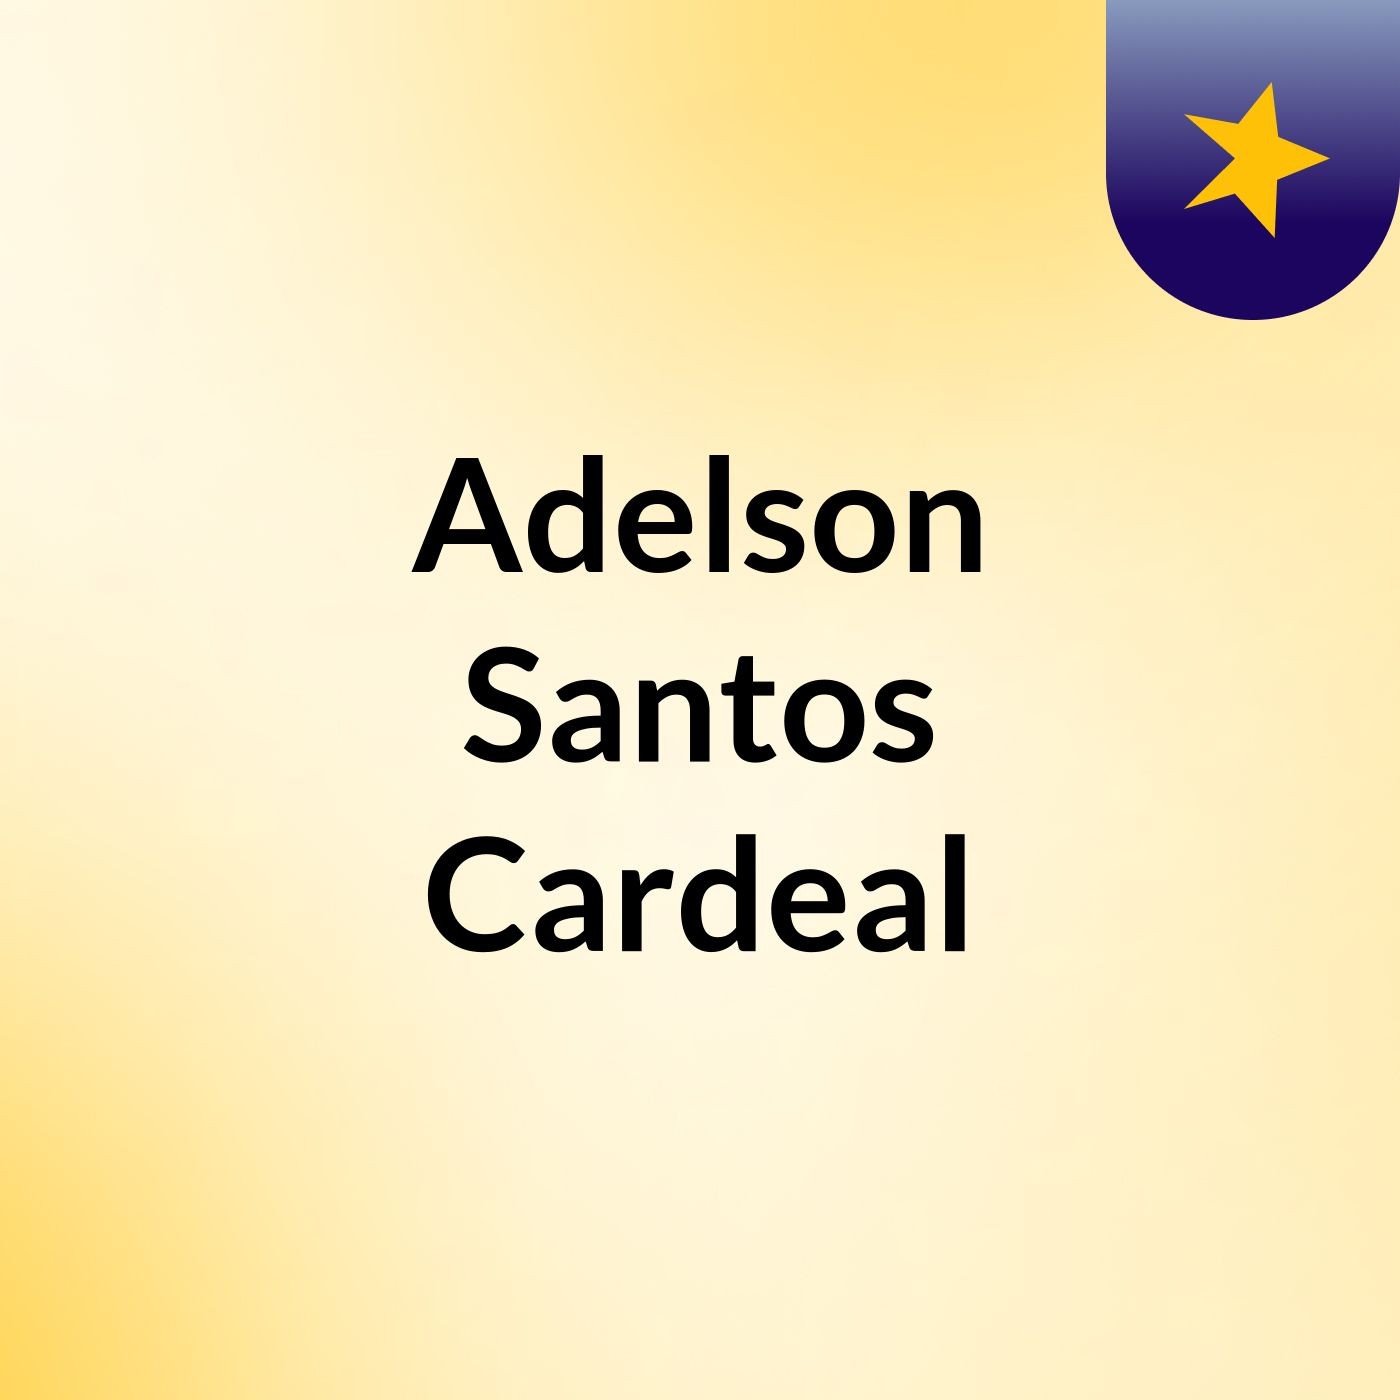 Adelson Santos Cardeal